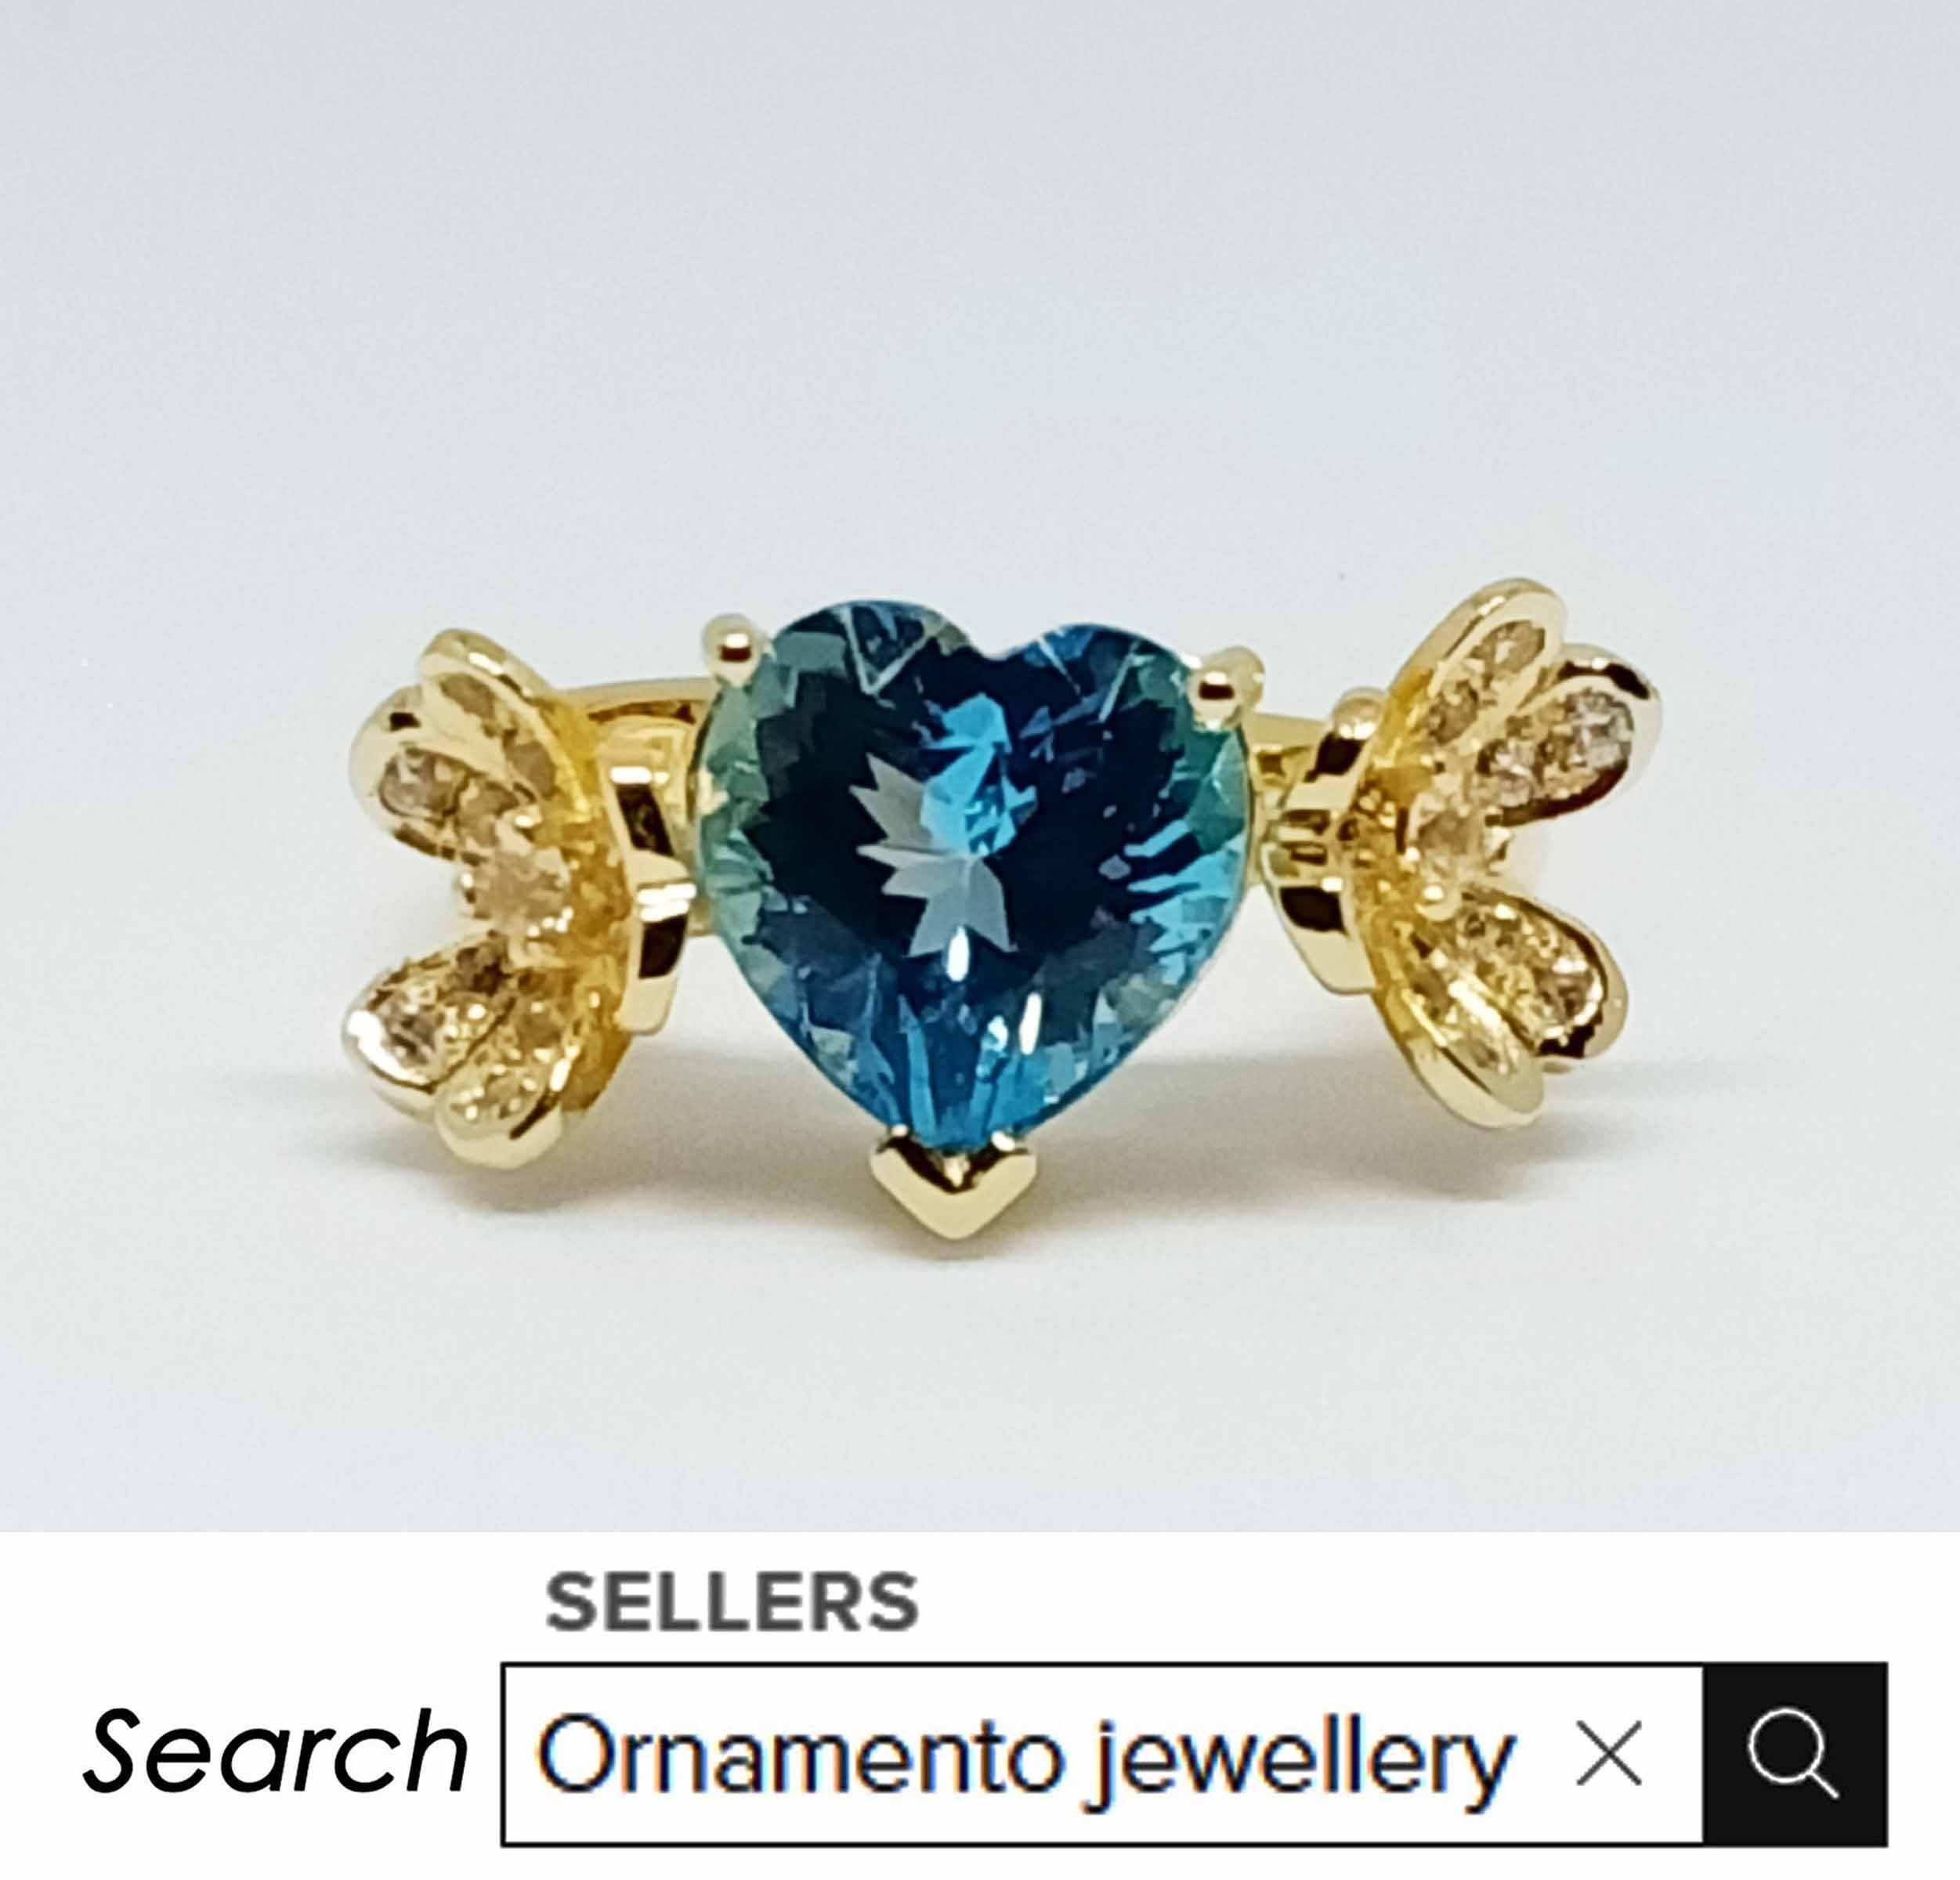 Swiss blue topaz. Heart shape 10x10mm. ( 4.06 cts )
White zircon 1.25 mm.
White zircon 2.0 mm.
Sterling Silver on 18K gold Plated.
Size 7 us.
(Can be resizable lower size not upper size )

Search (seller storefront) ornamento jewellery